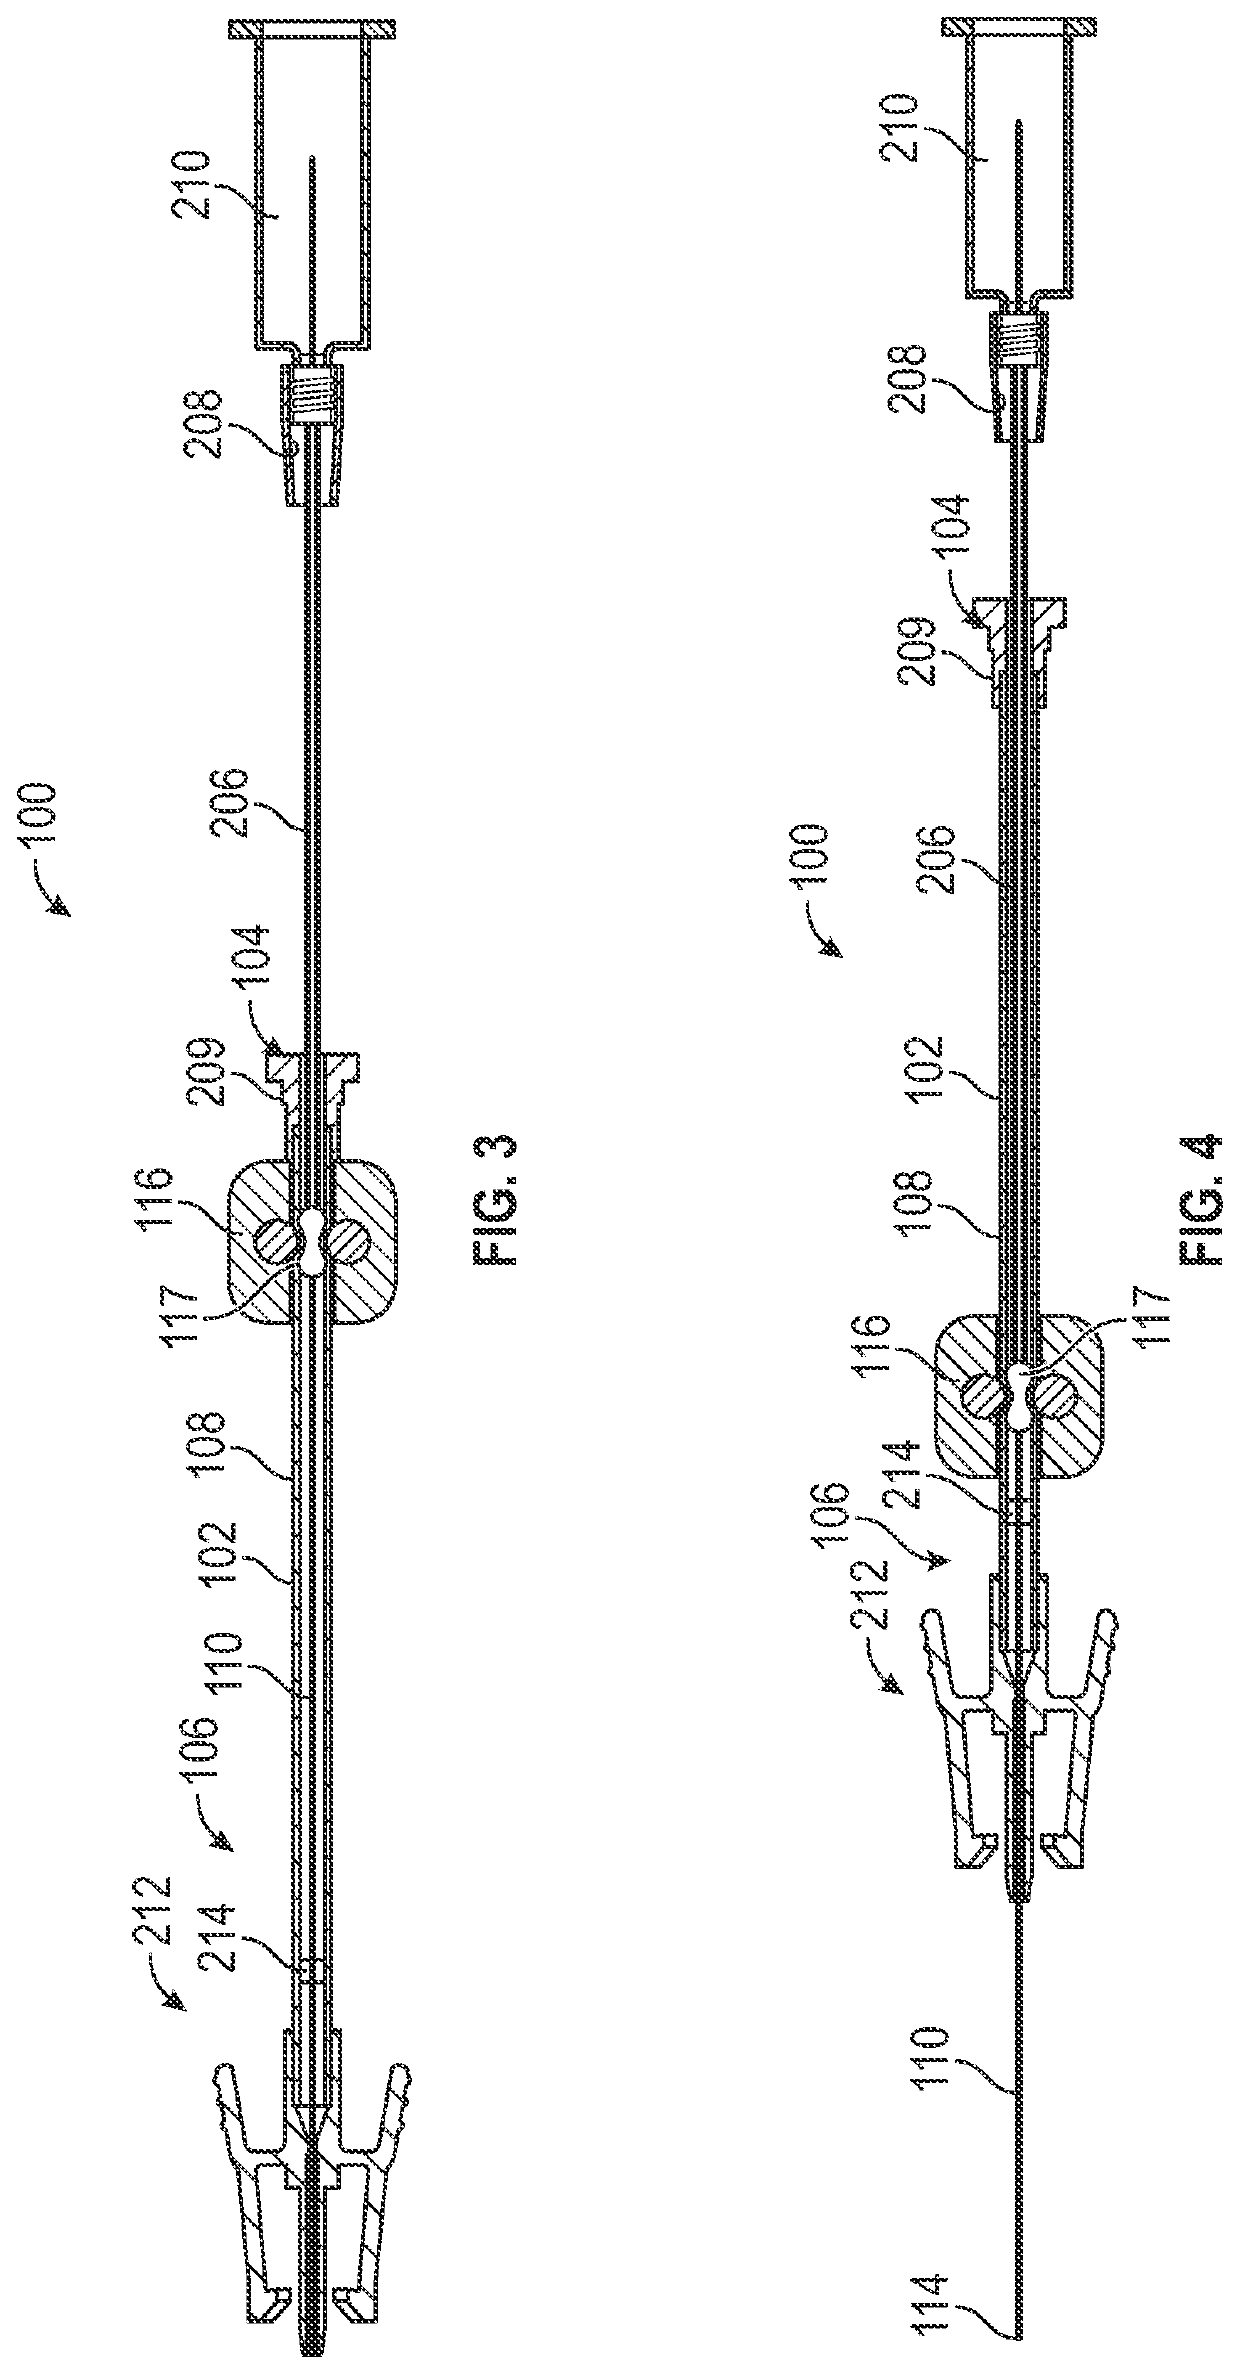 Extension set and related systems and methods